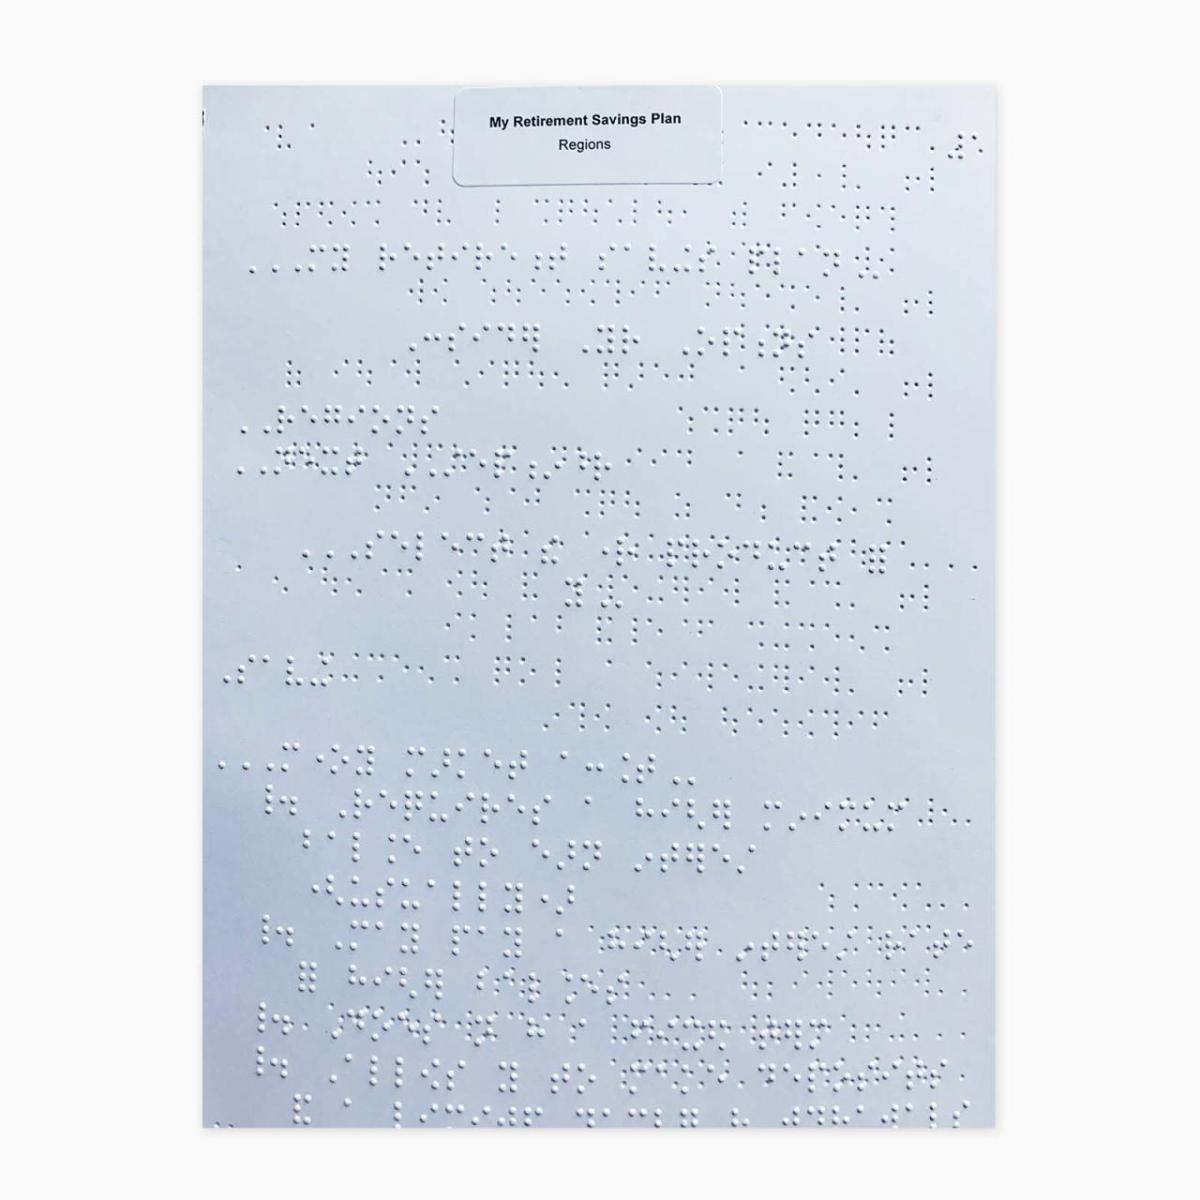 A page of Braille text labeled My Retirement Savings Plan